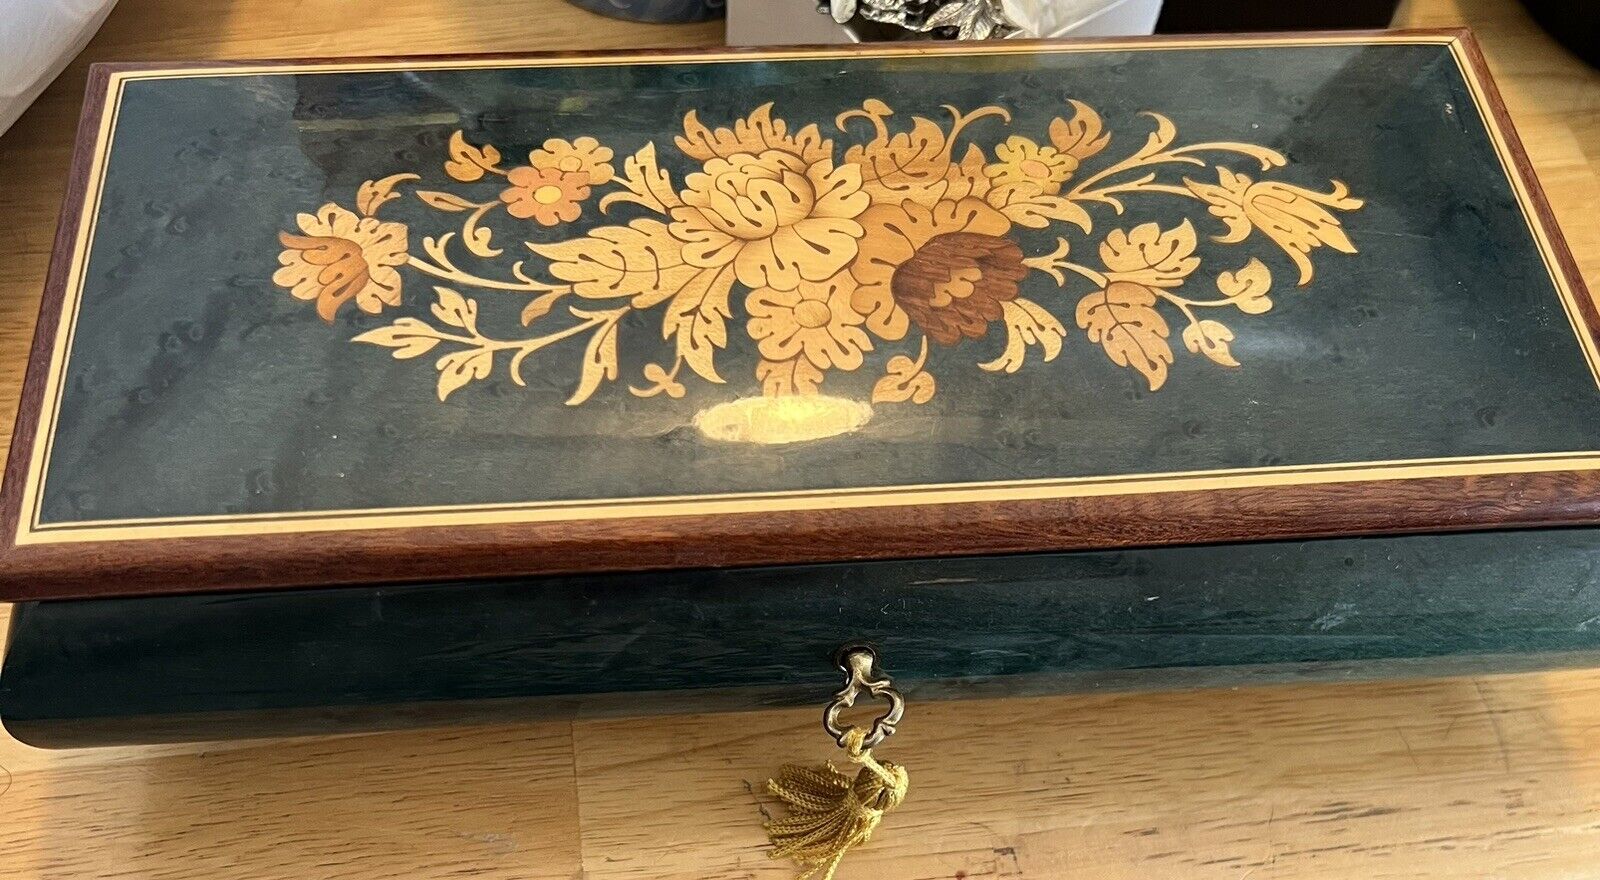 VTG REUGE MUSIC JEWELRY BOX INLAID WOOD WORKING “THE ENTERTAINER” 10.5”x4.5”